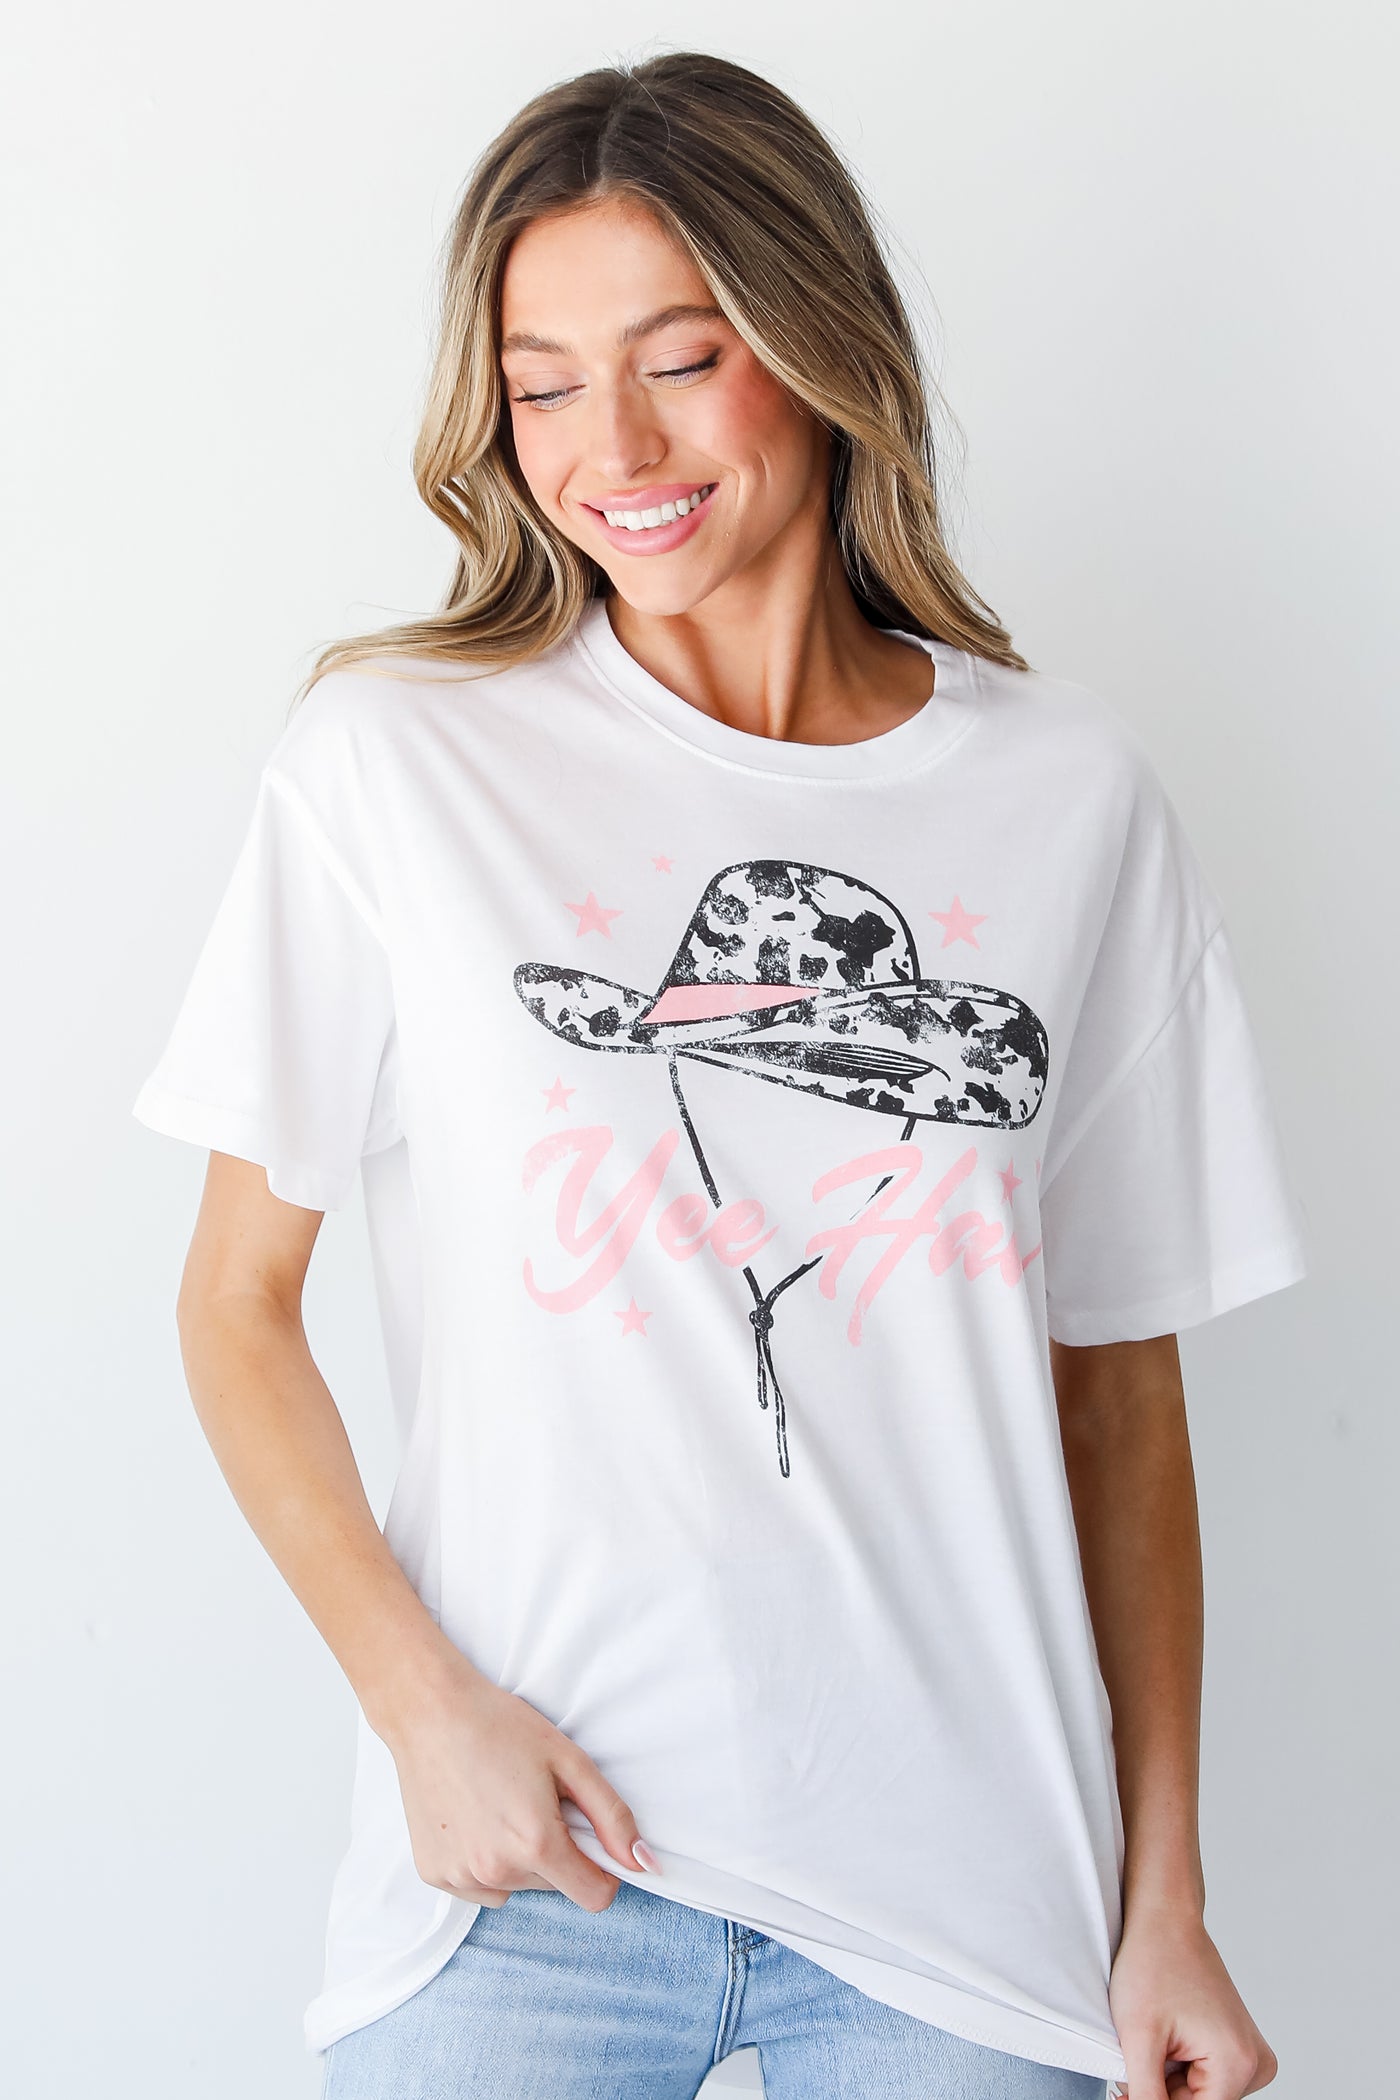 Yeehaw Oversized Graphic Tee front view